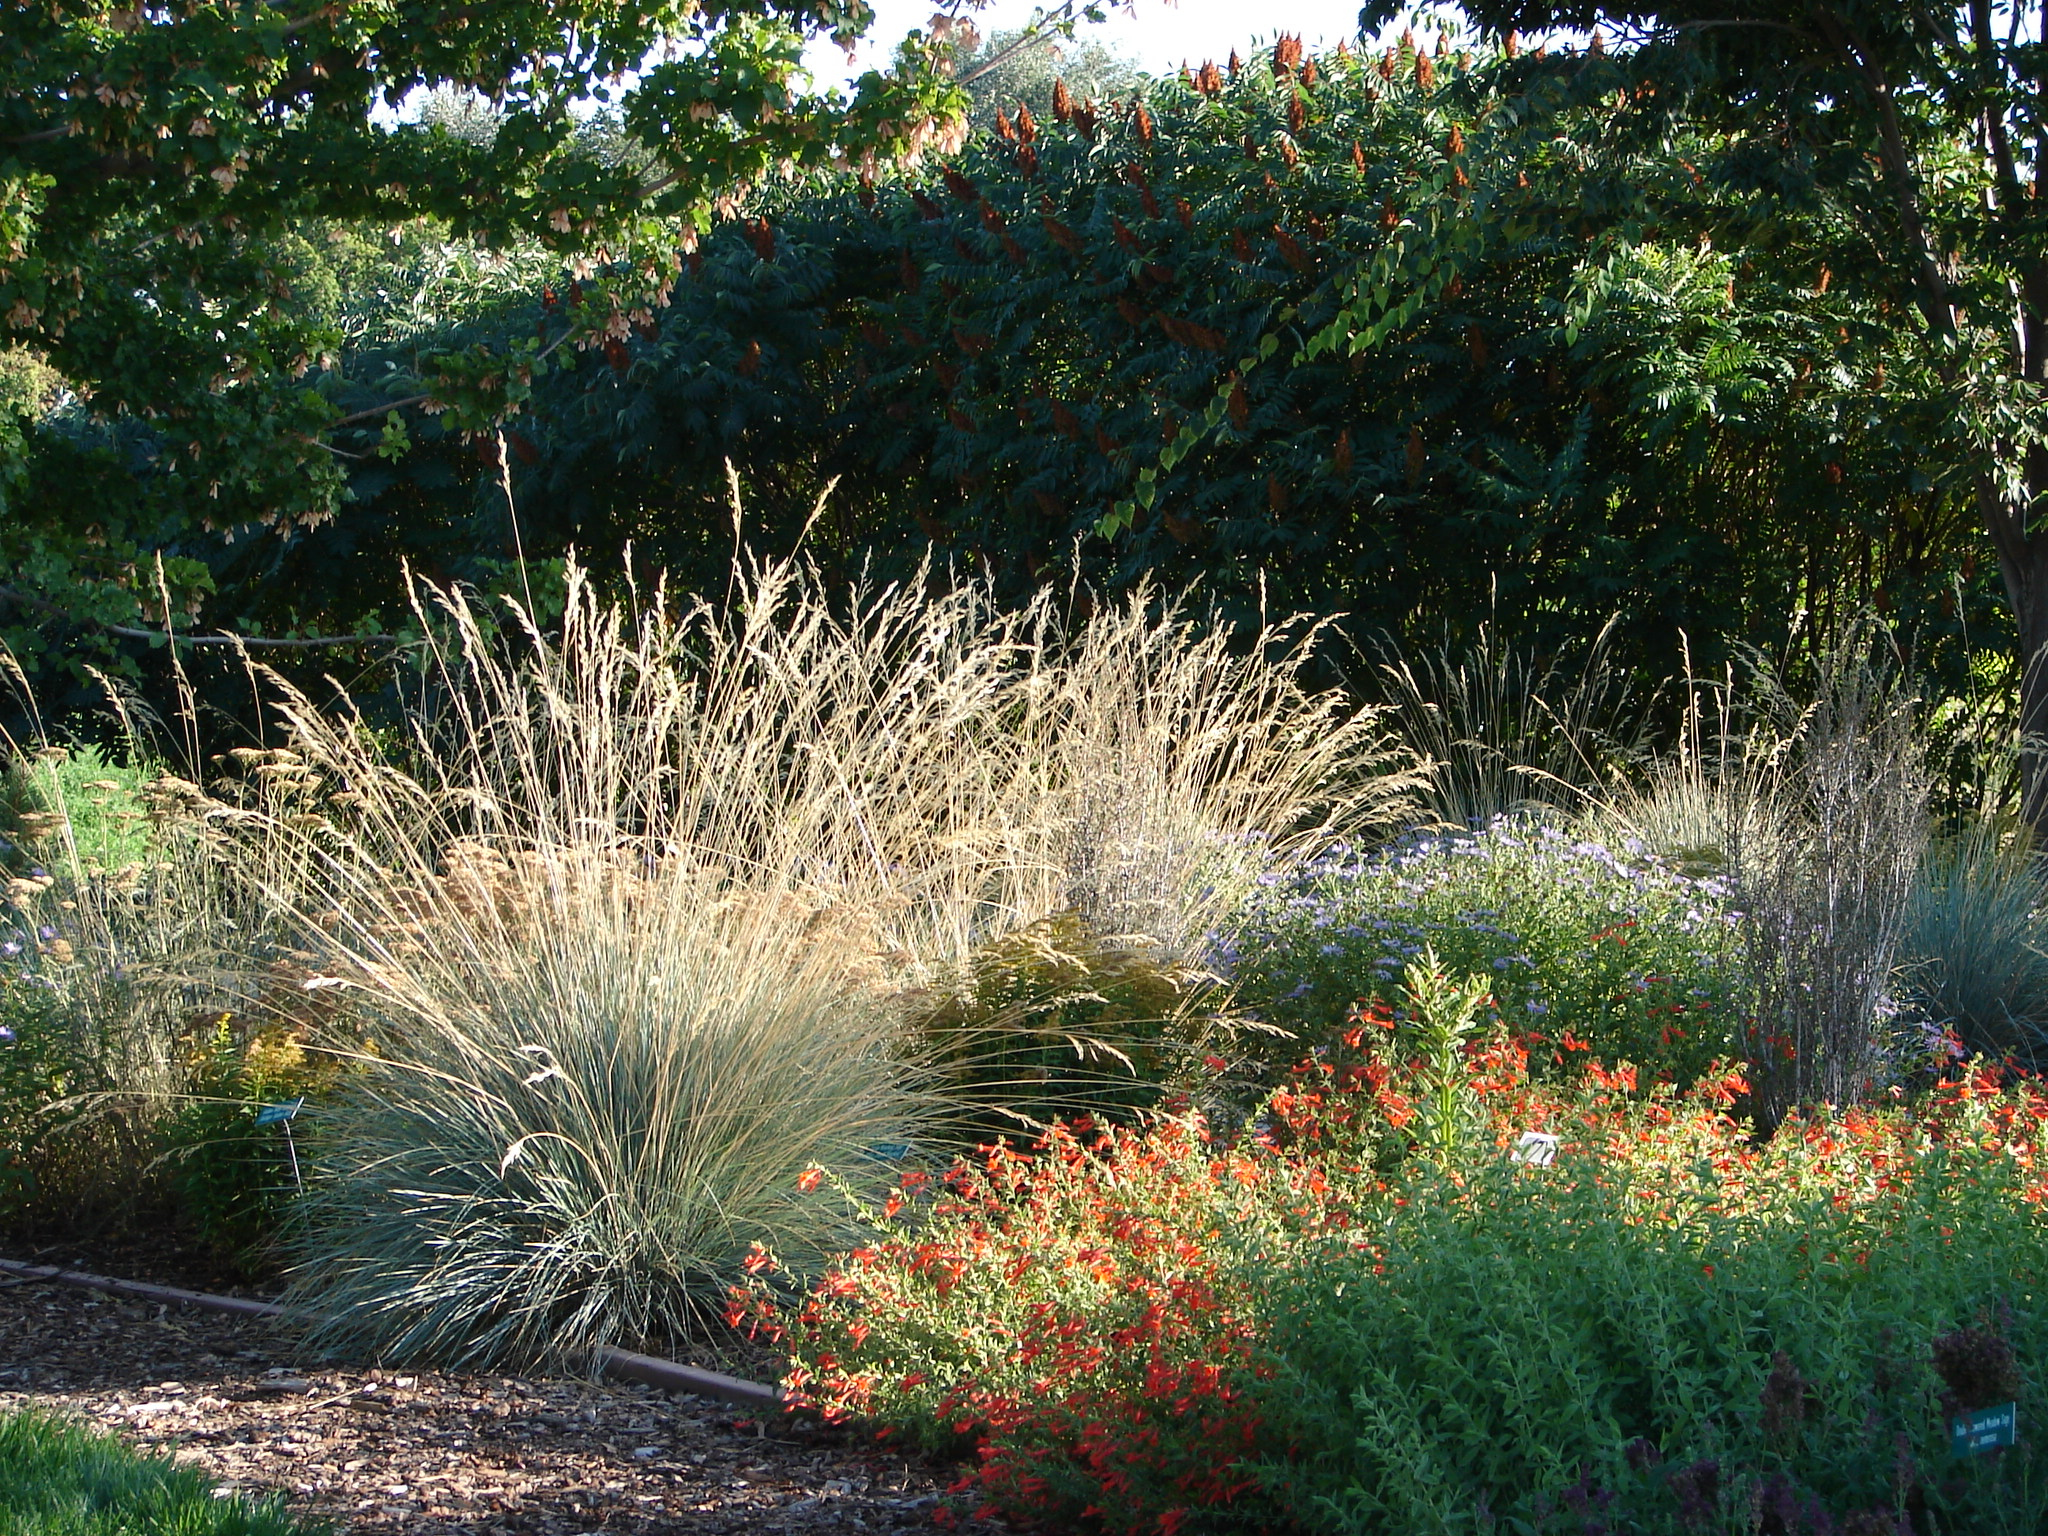 Ornamental grass provides an effective accent in a border (Thinkstock/PA)